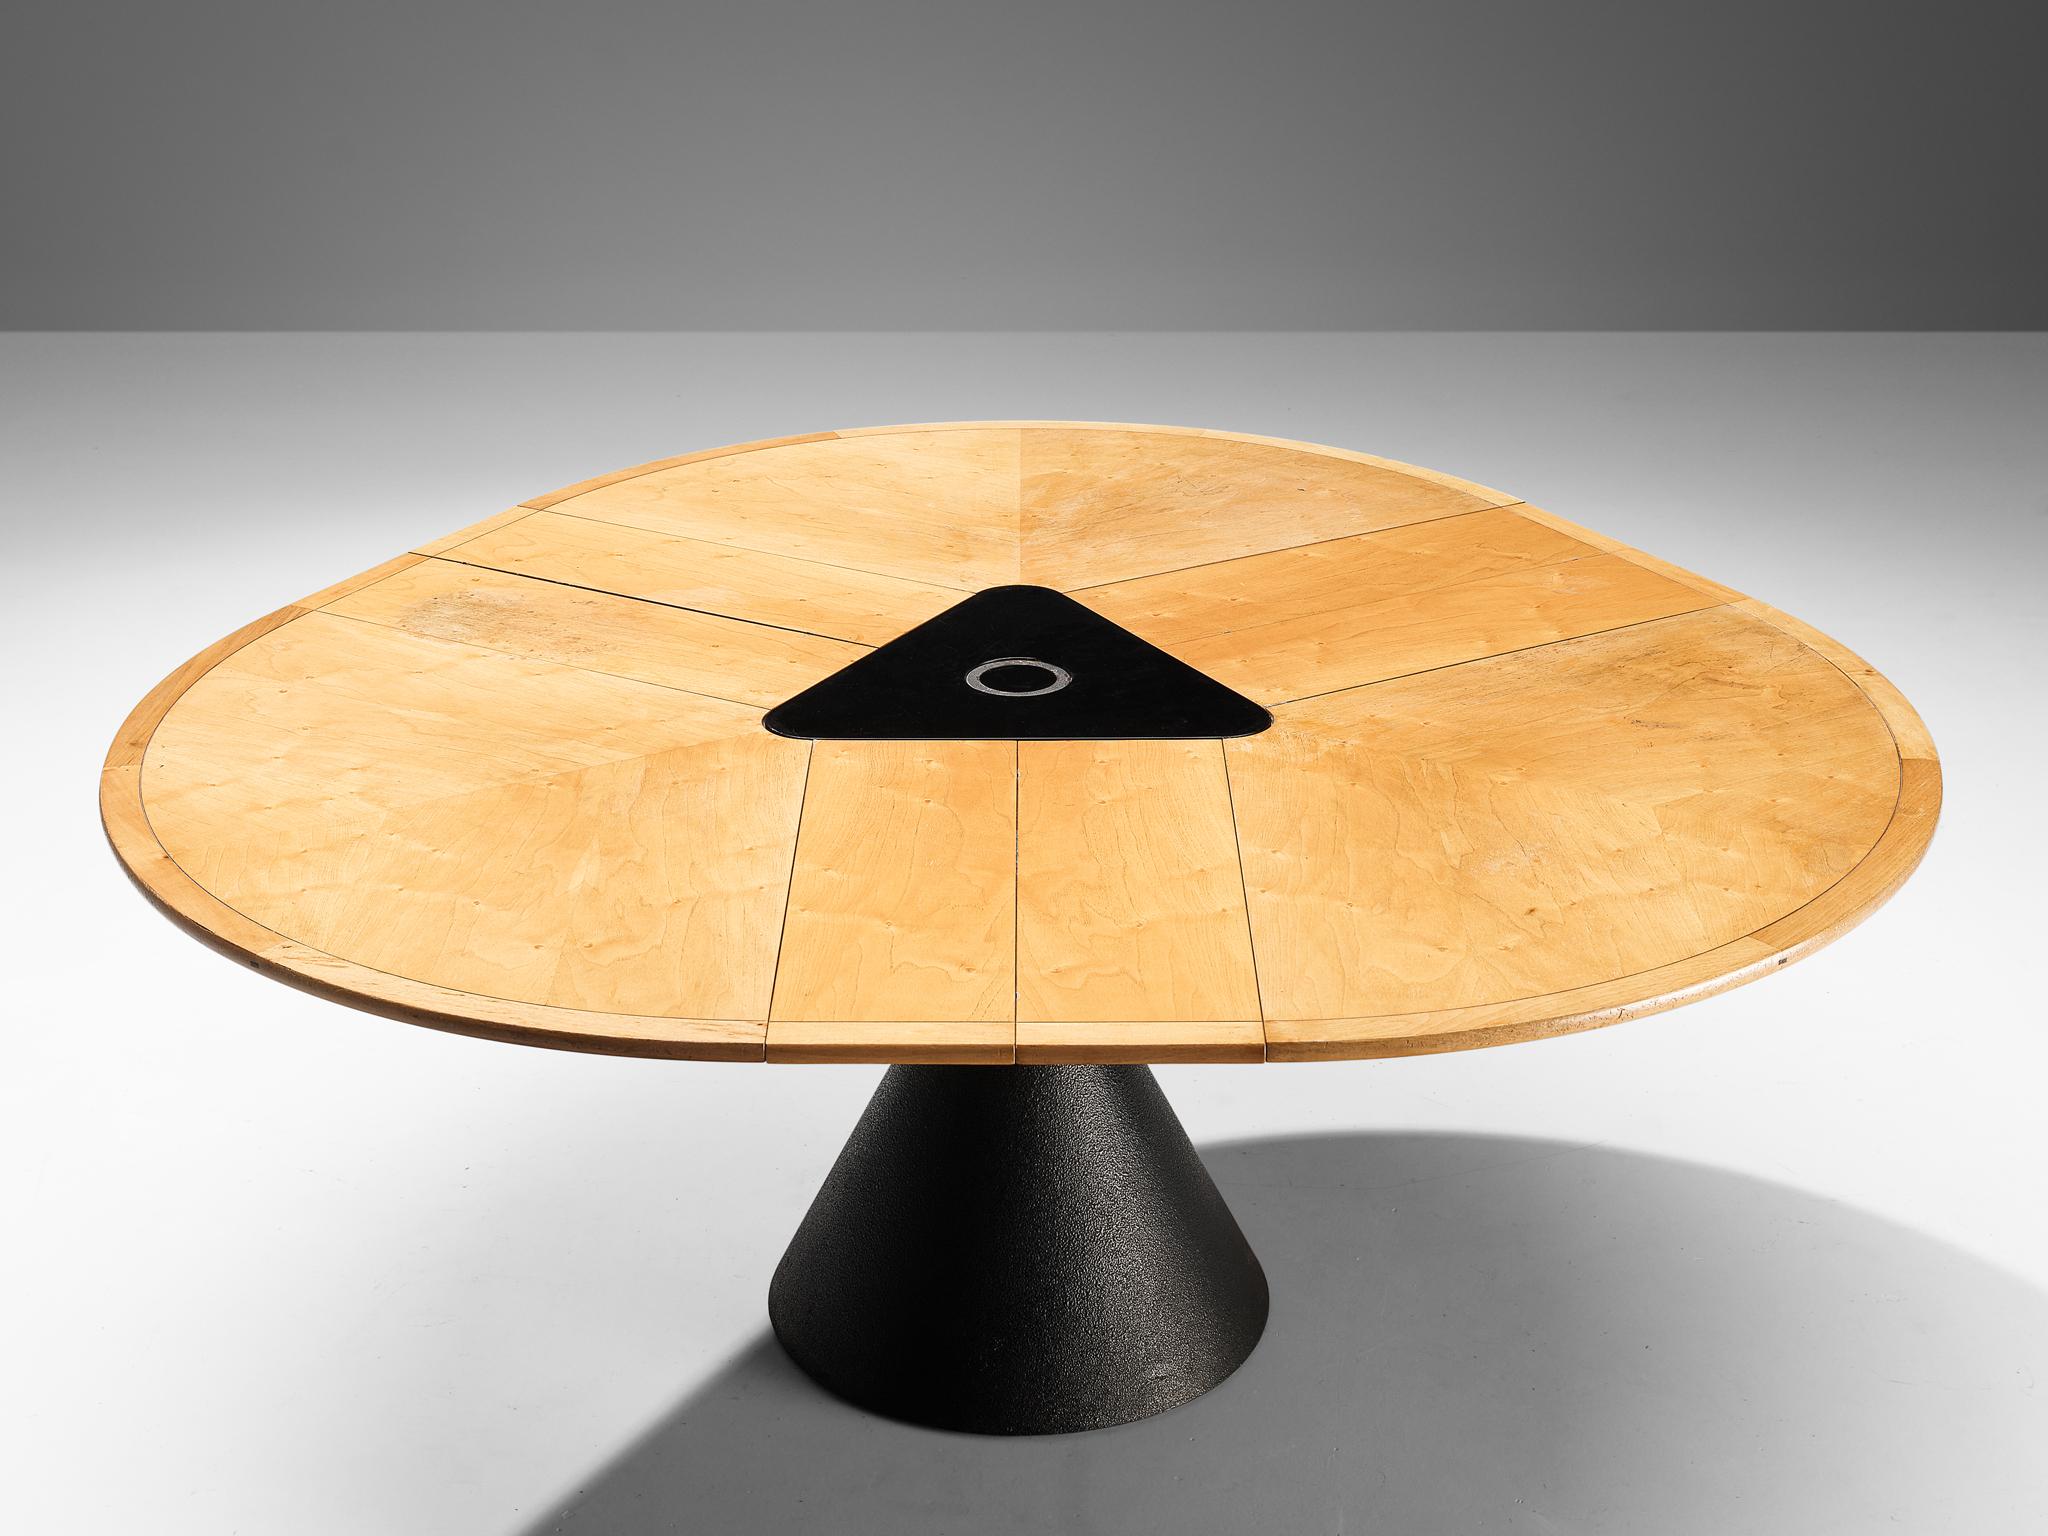 Francesco Fois for Bernini, maple, metal, Italy, 1986

Table model Click designed by Francesco Fois for Bernini in 1986. The table has a structured cone shaped metal base, and an ingenious top that is extensible. When closed, the table has a round